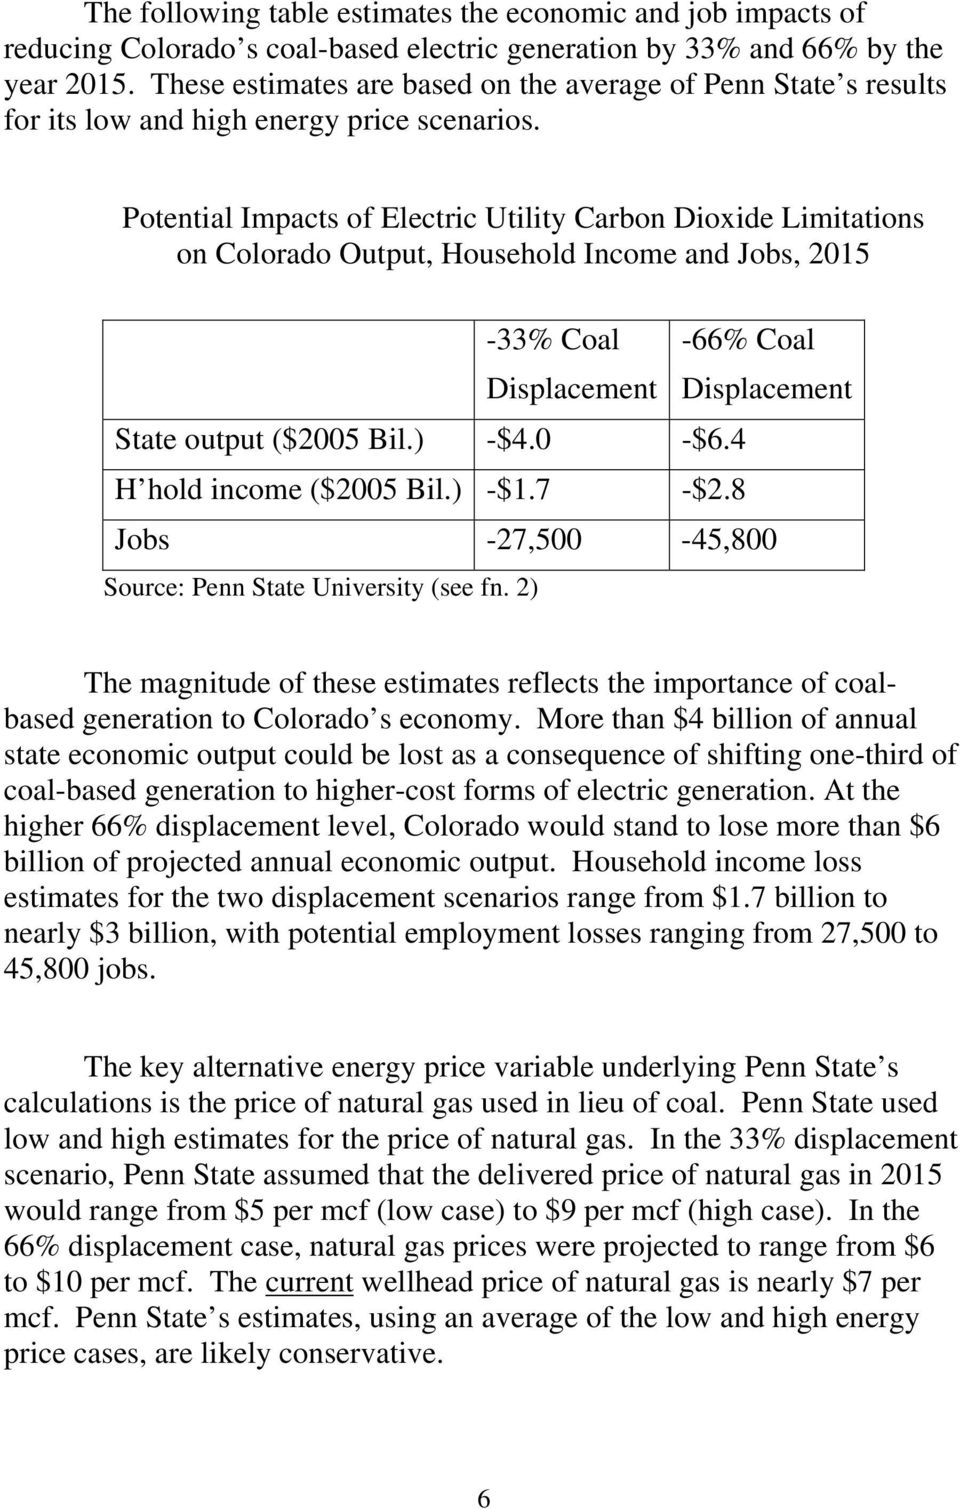 Potential Impacts of Electric Utility Carbon Dioxide Limitations on Colorado Output, Household Income and Jobs, 2015-33% Coal Displacement -66% Coal Displacement State output ($2005 Bil.) -$4.0 -$6.